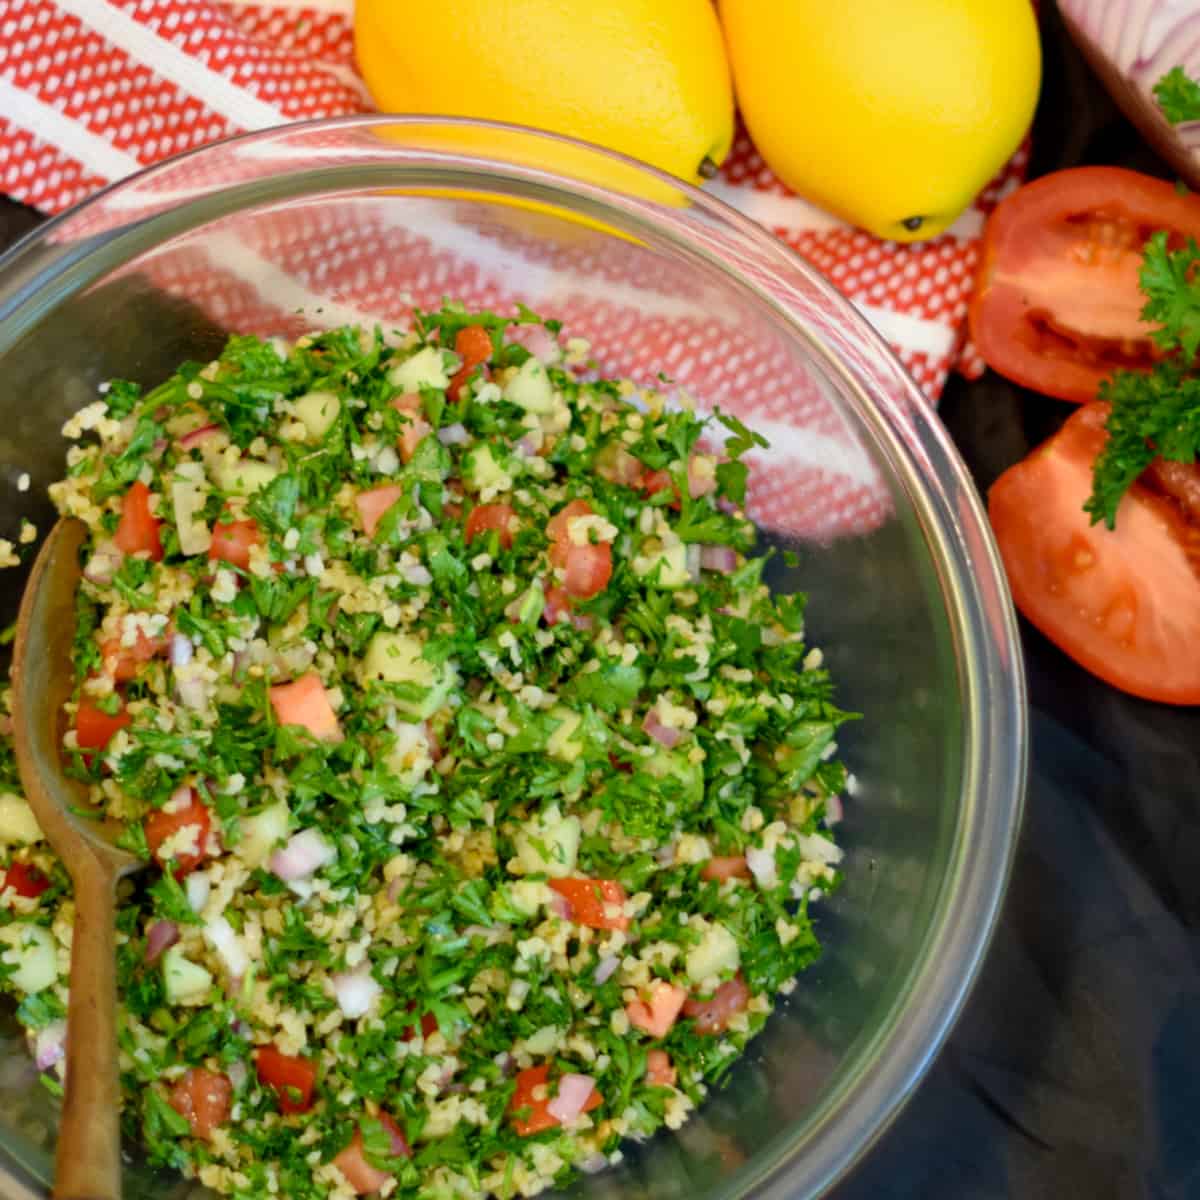 Lemons, tomato halves, and a red towel enhance this picture of Tabouleh Salad.